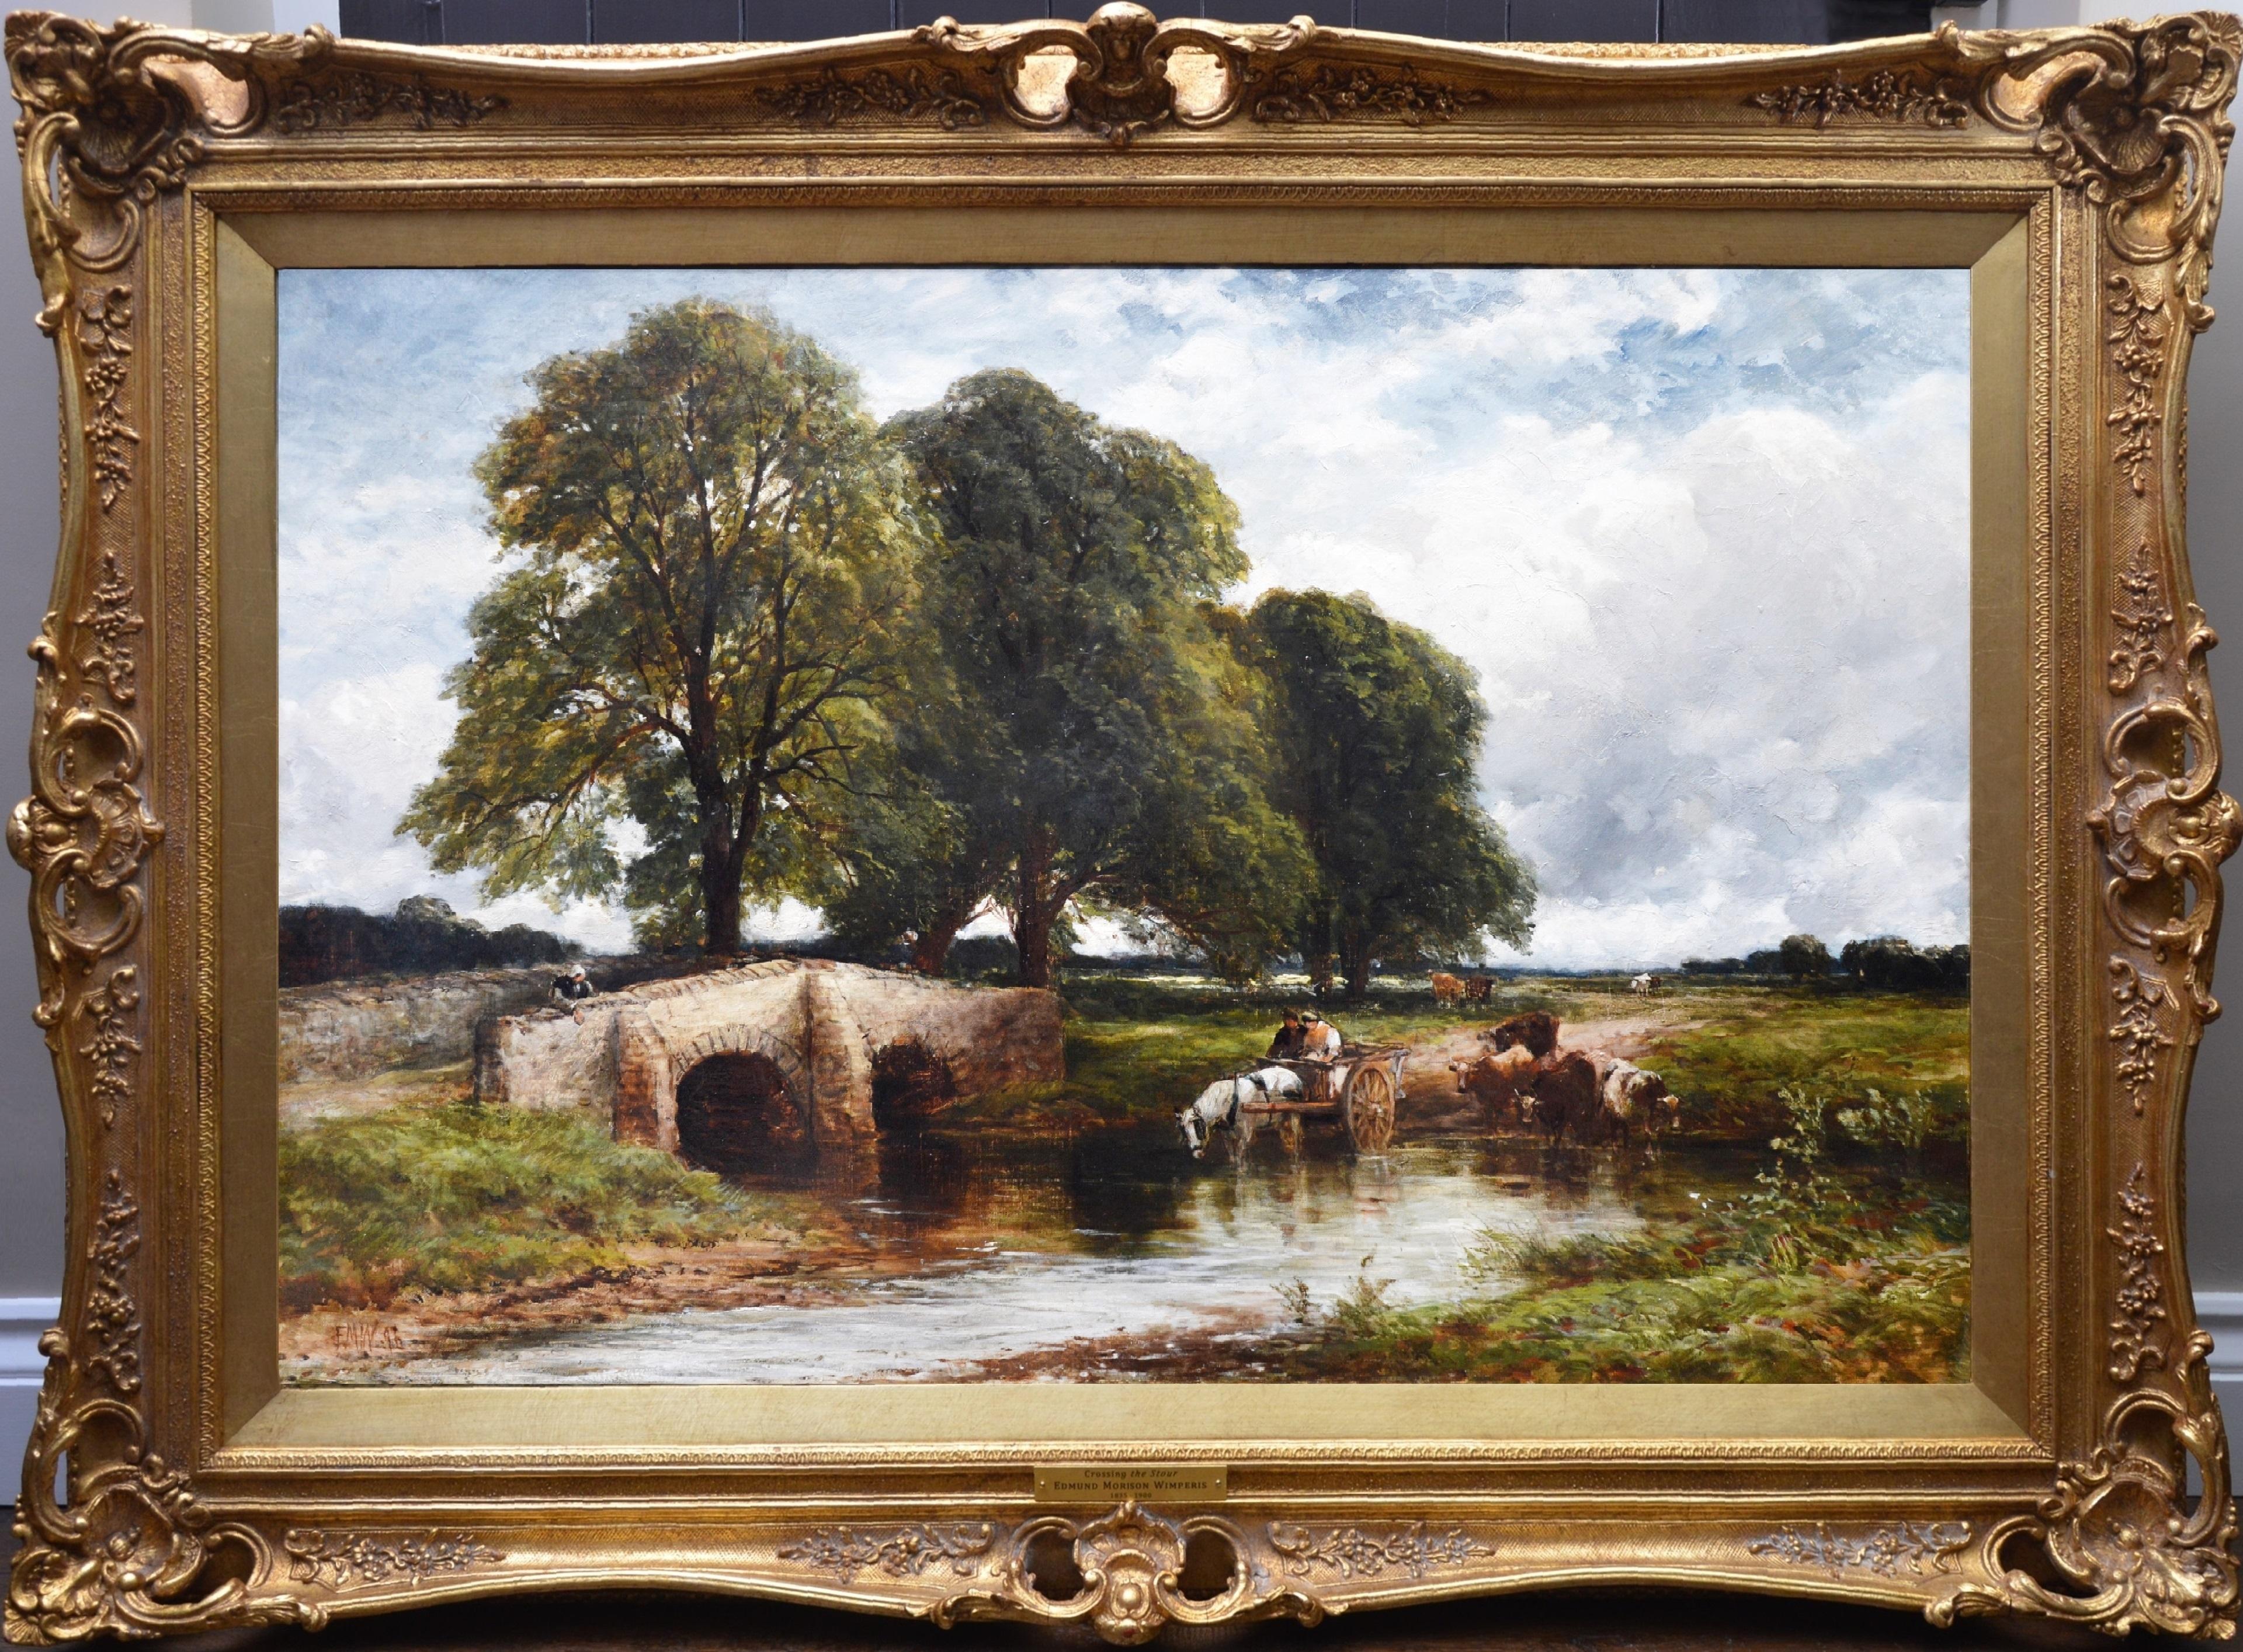 Edmund Wimperis Animal Painting - Crossing the Stour - Large 19th Century English Landscape Oil Painting  